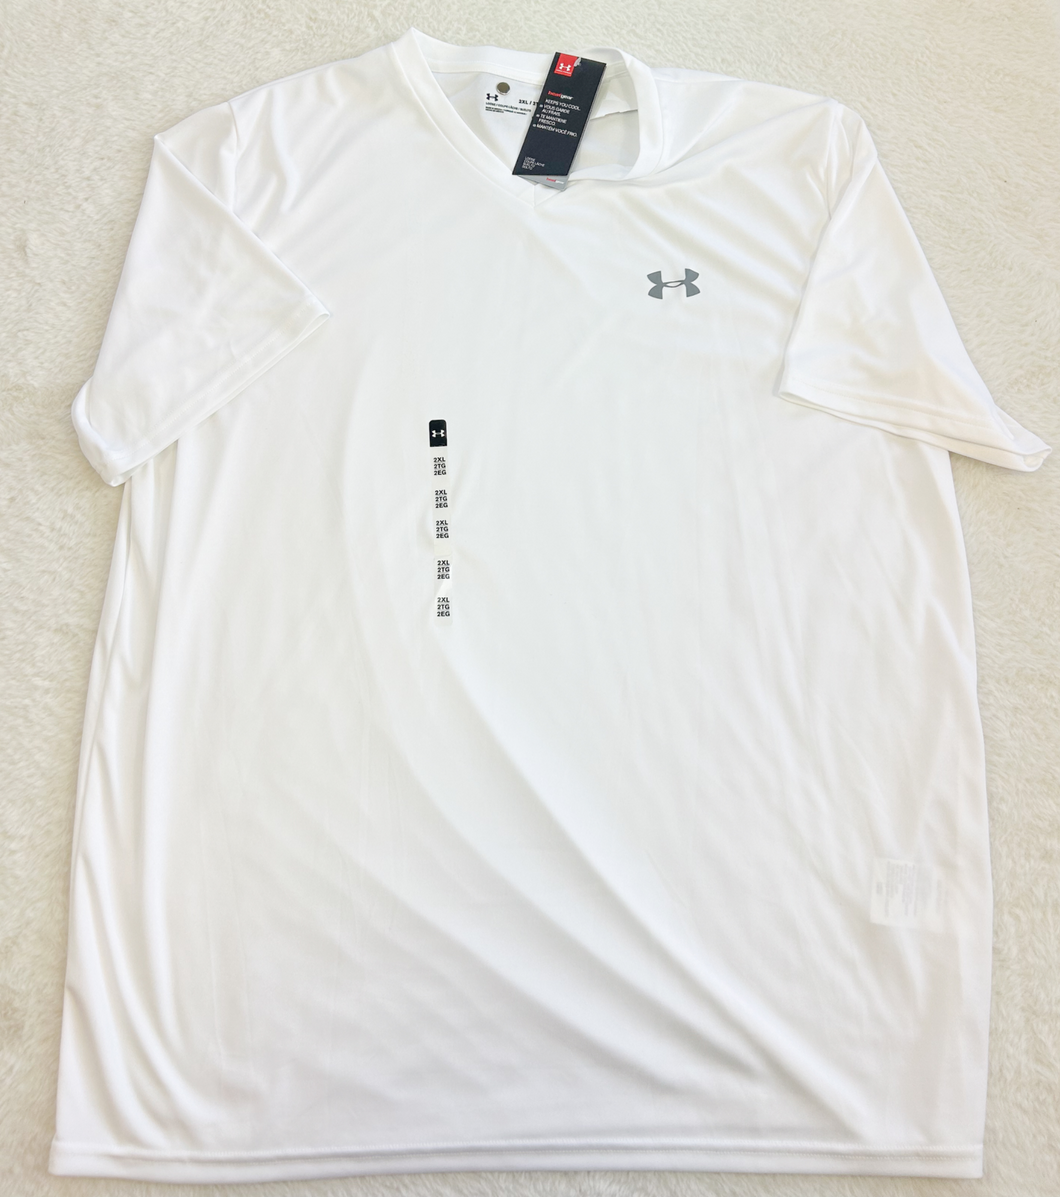 Under Armour Athletic Top Size XXL P0506